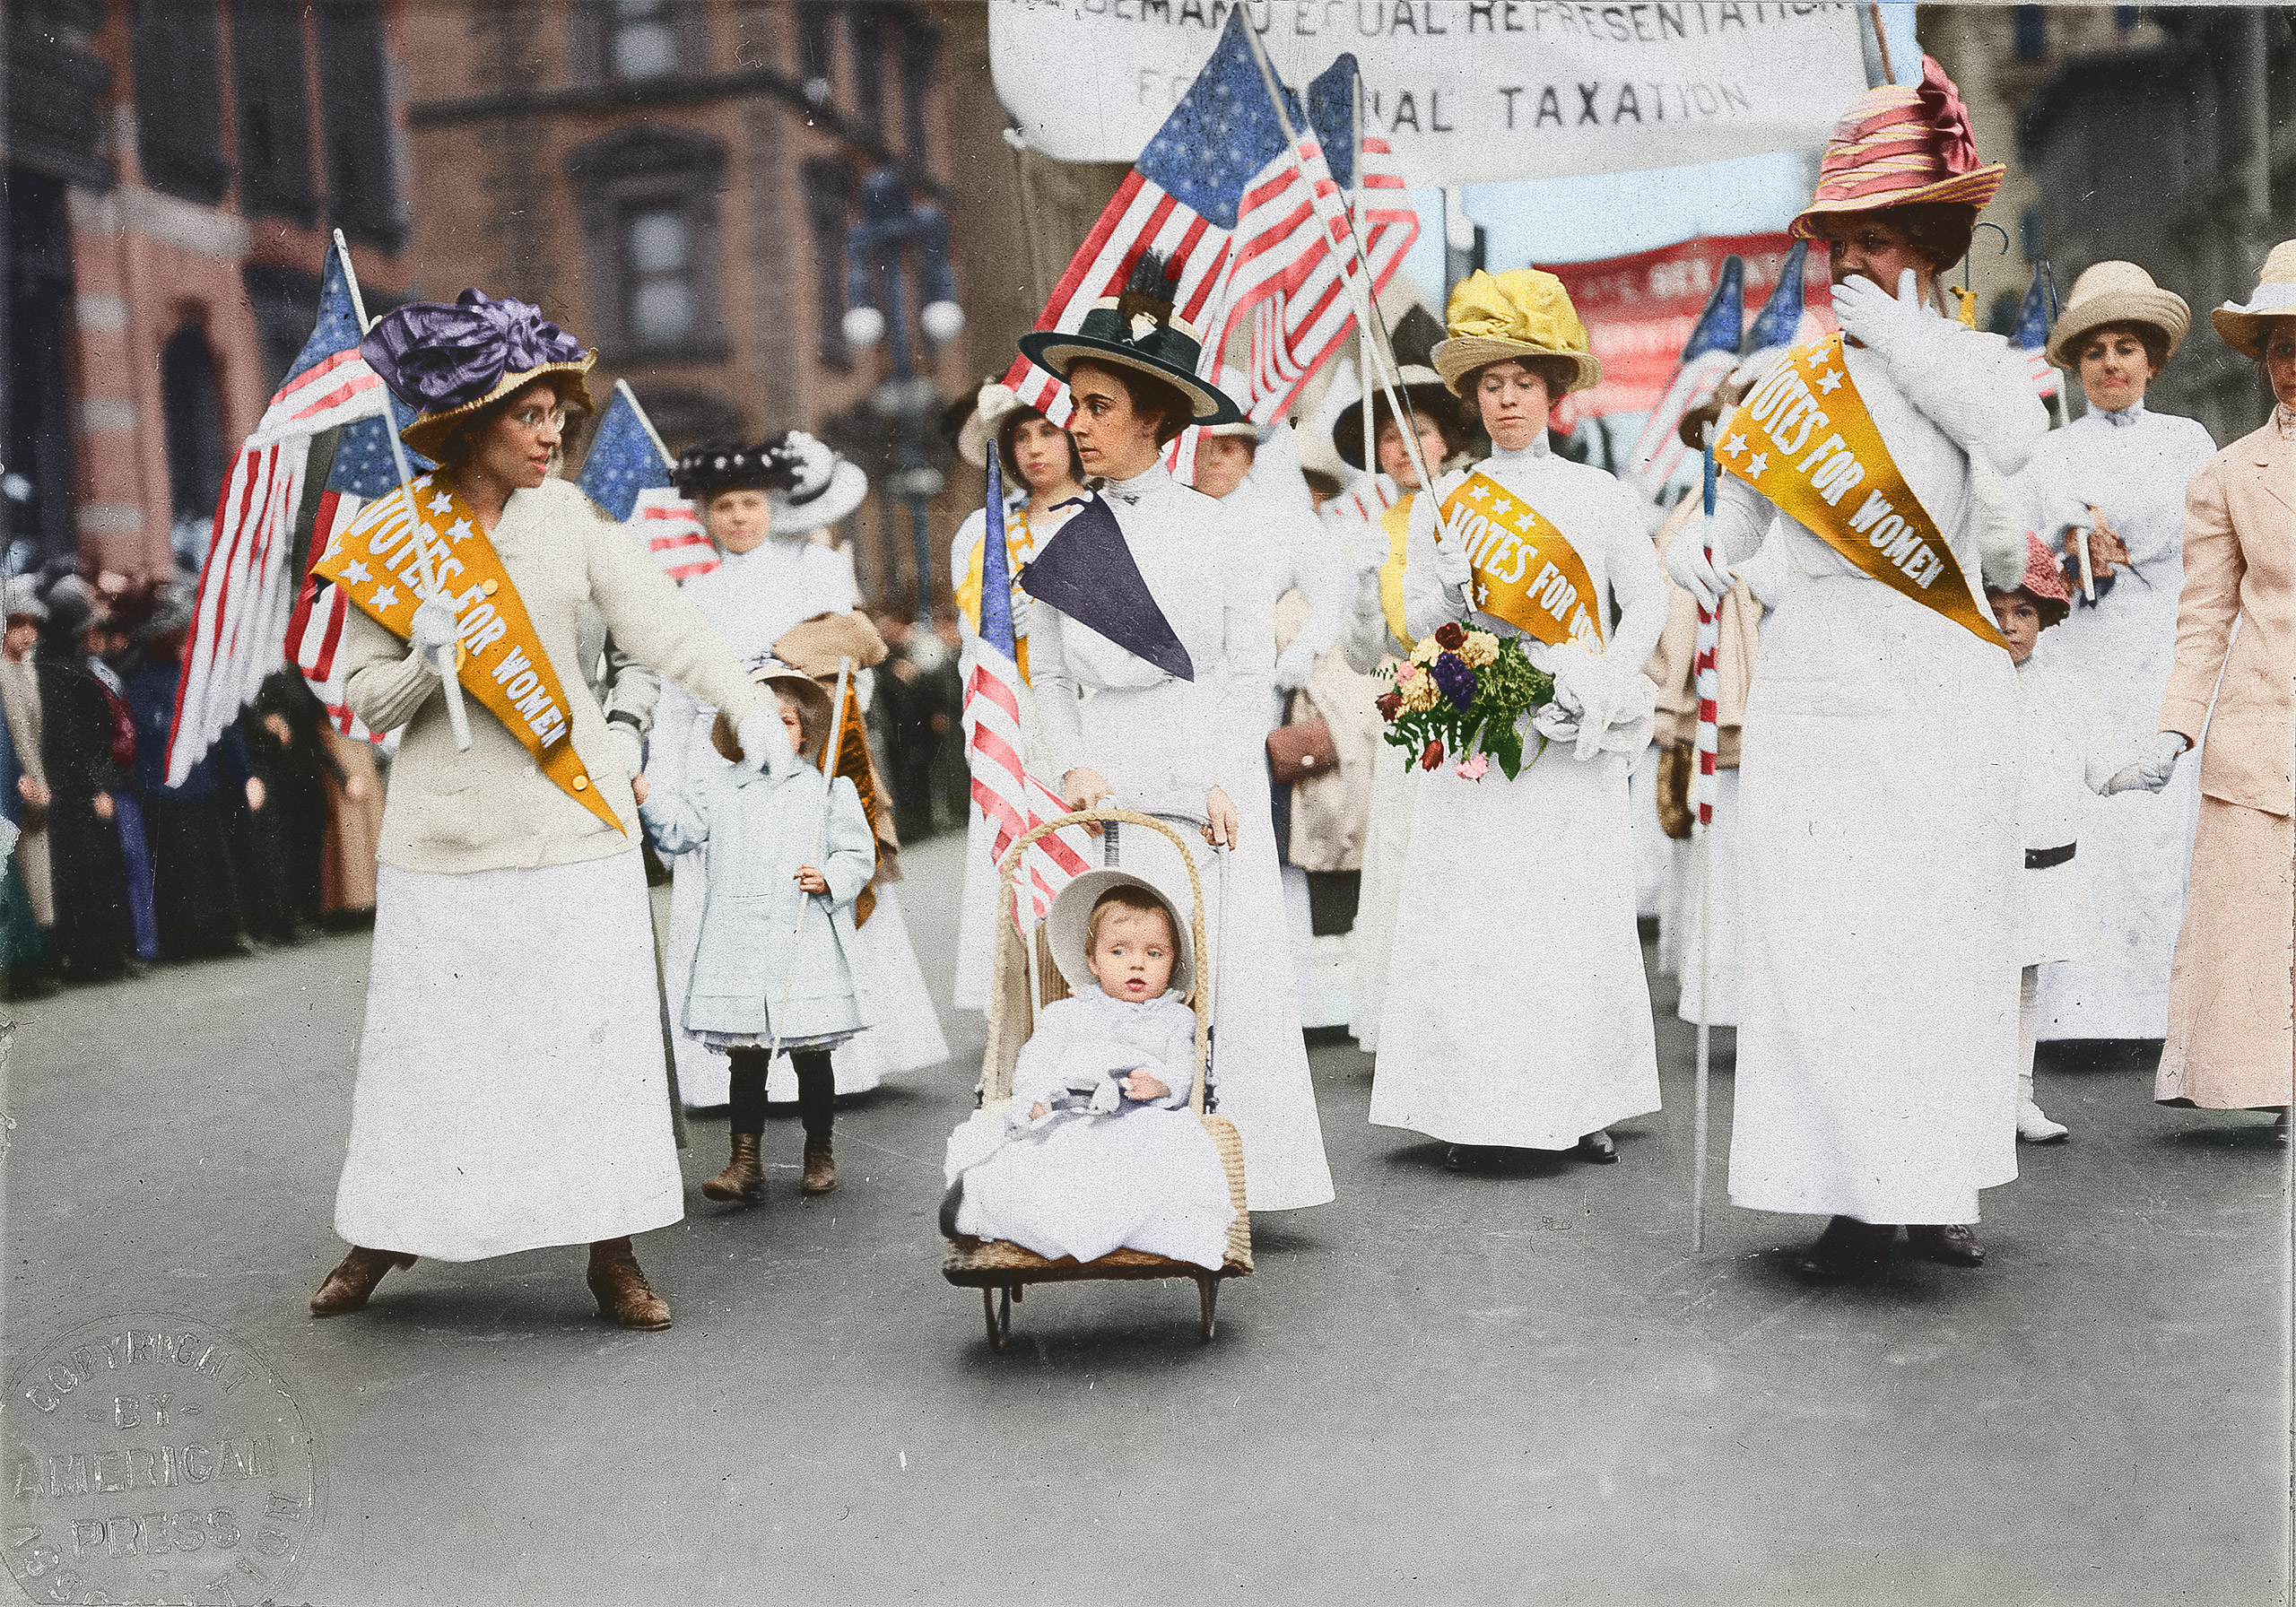 Youngest parader in a New York City suffragist parade, May 1912.